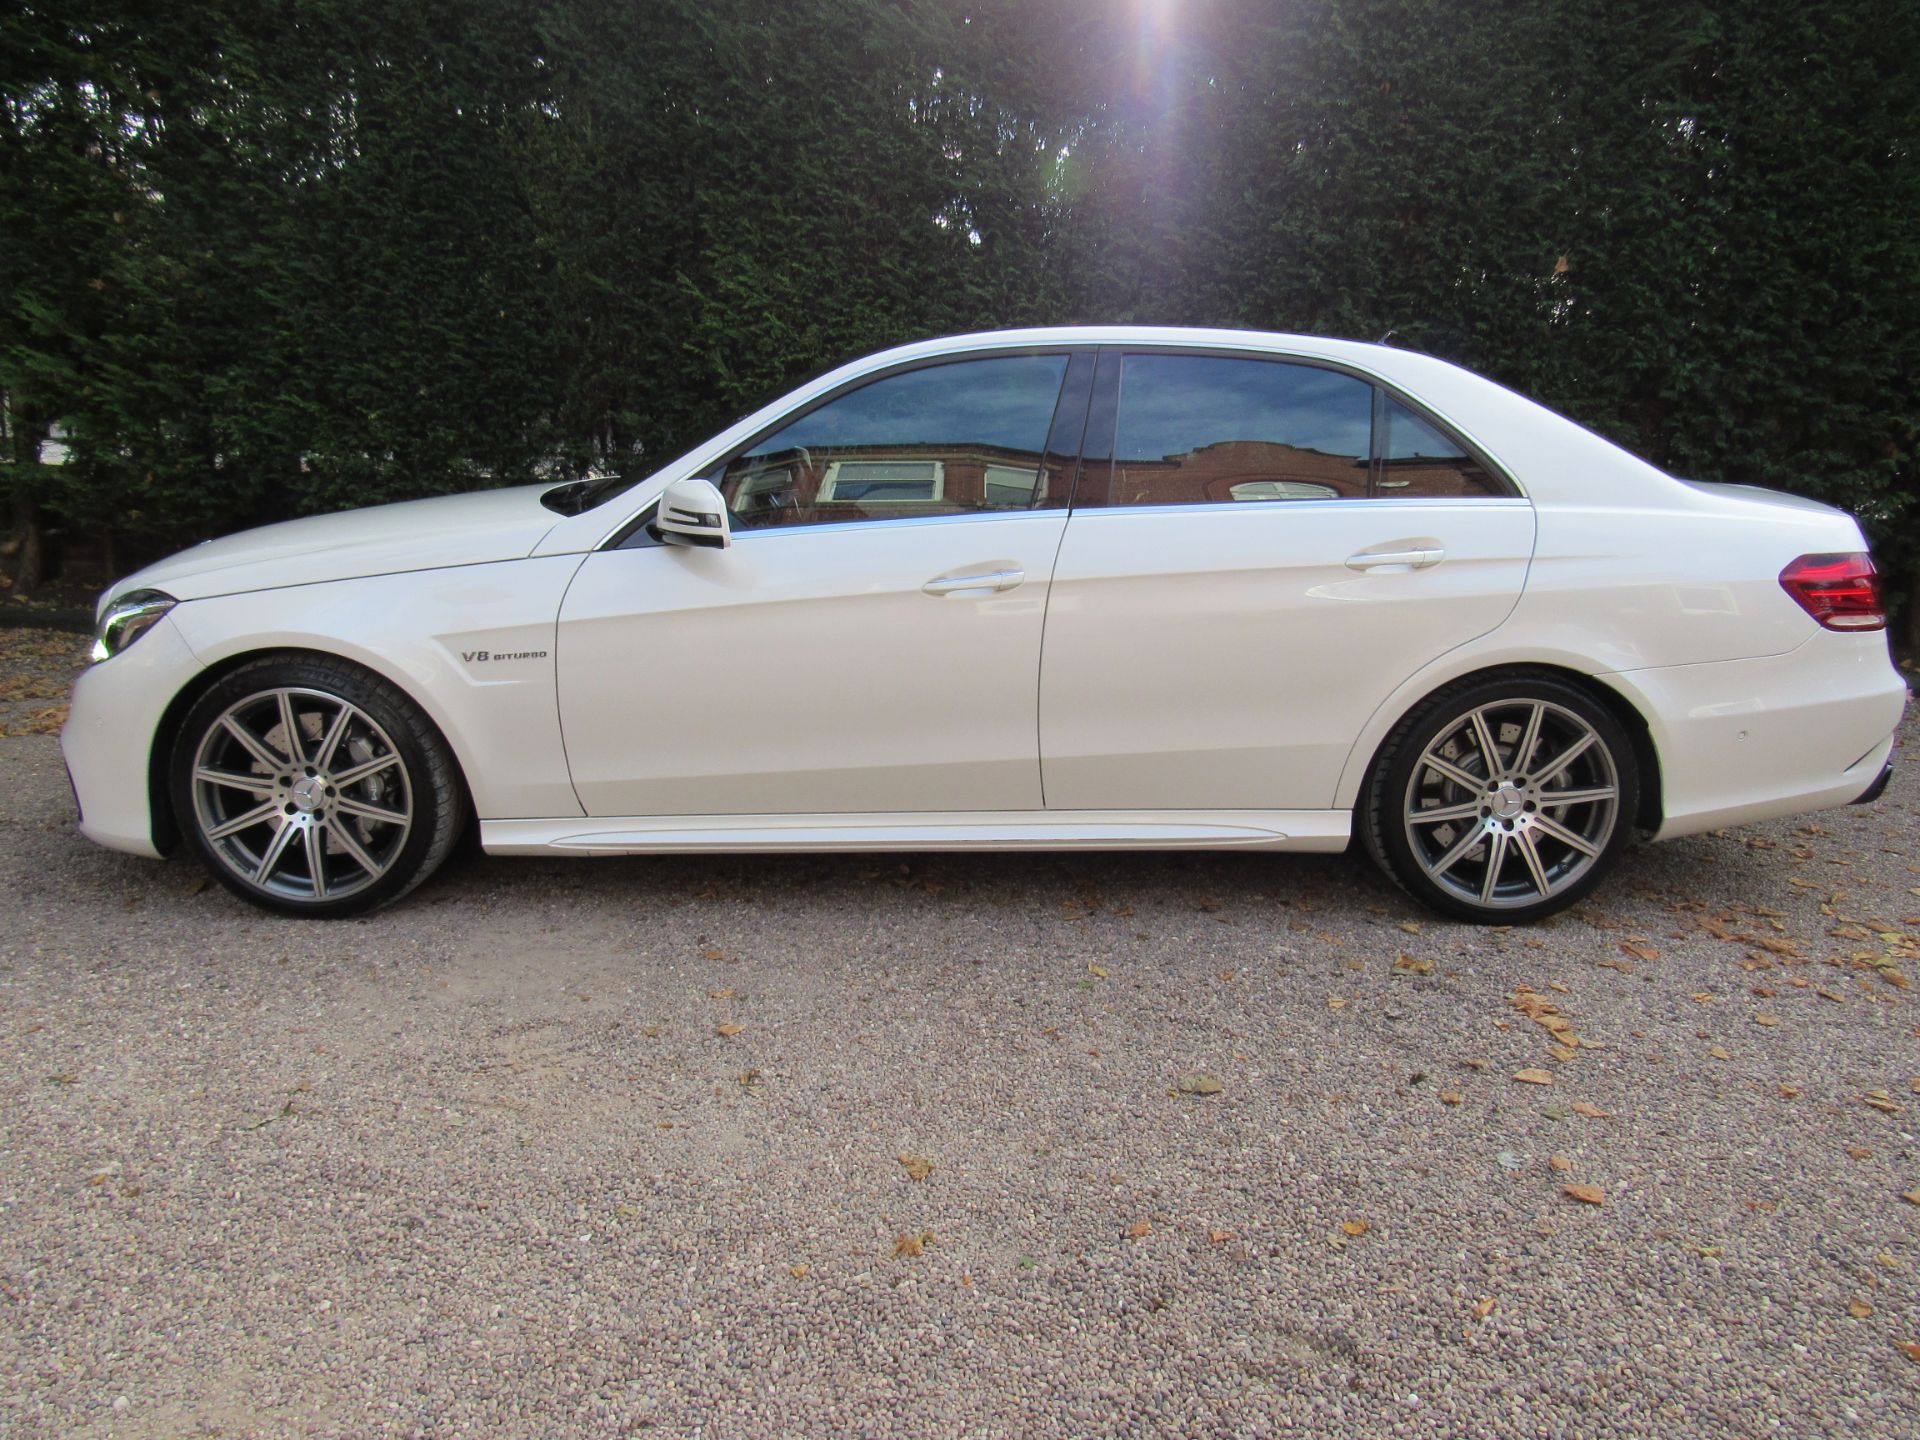 Mercedes-Benz E63 AMG Saloon - Registered 2013 - 33000 miles - This care has full panoramic sunroof, - Image 4 of 15